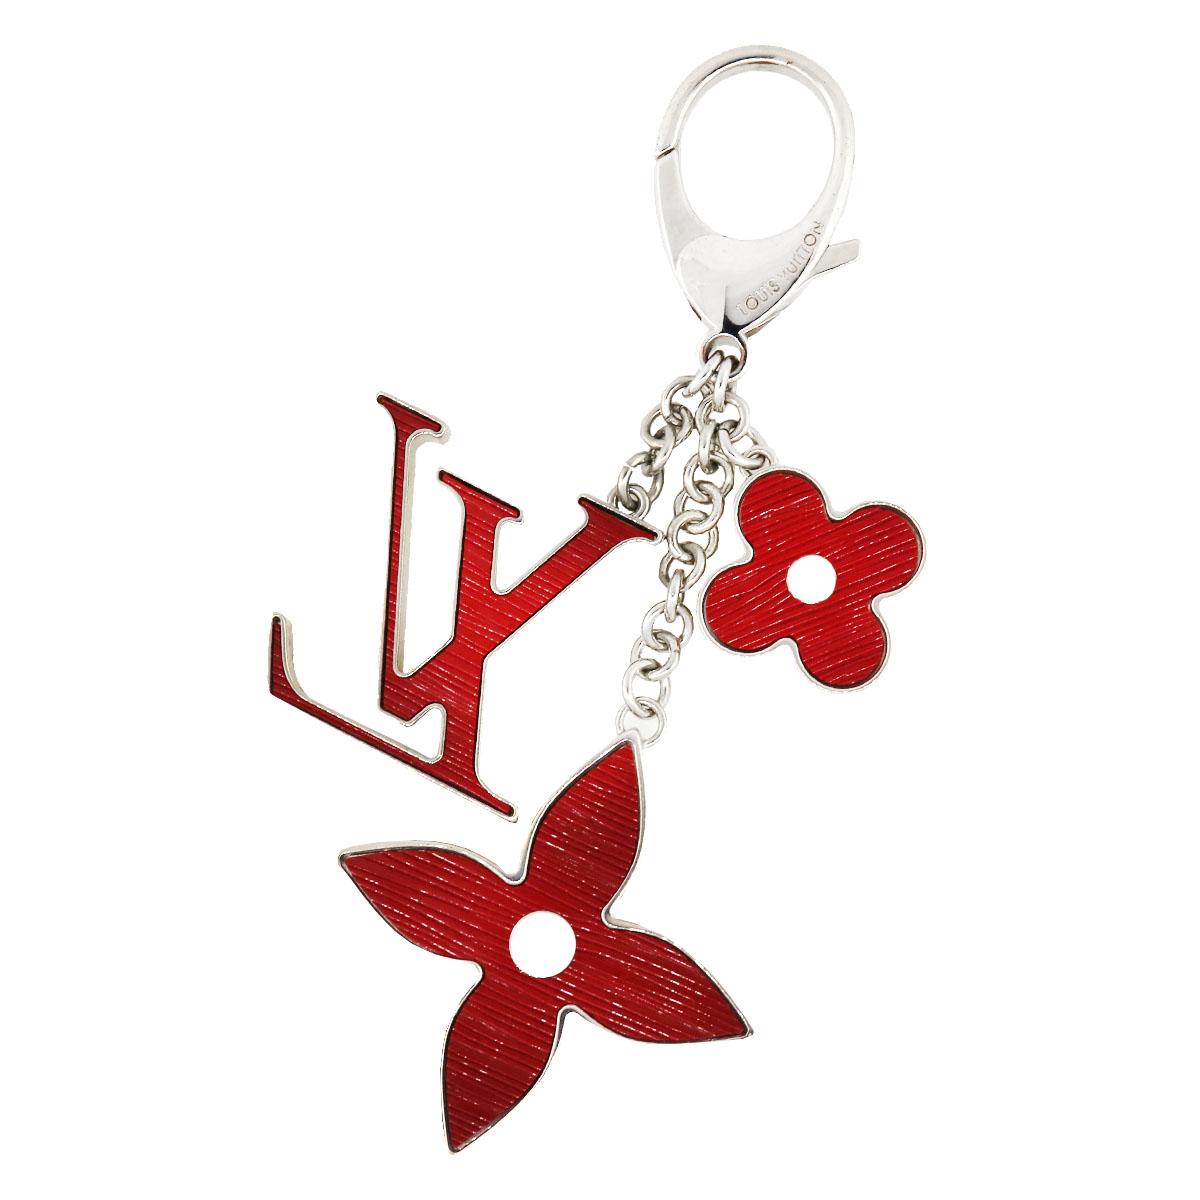 Company-Louis Vuitton
Model-Red Epi Flower Leather Key Chain
Color-Red
Date Code-N/A
Material-Epi Leather
Measurements
2.10